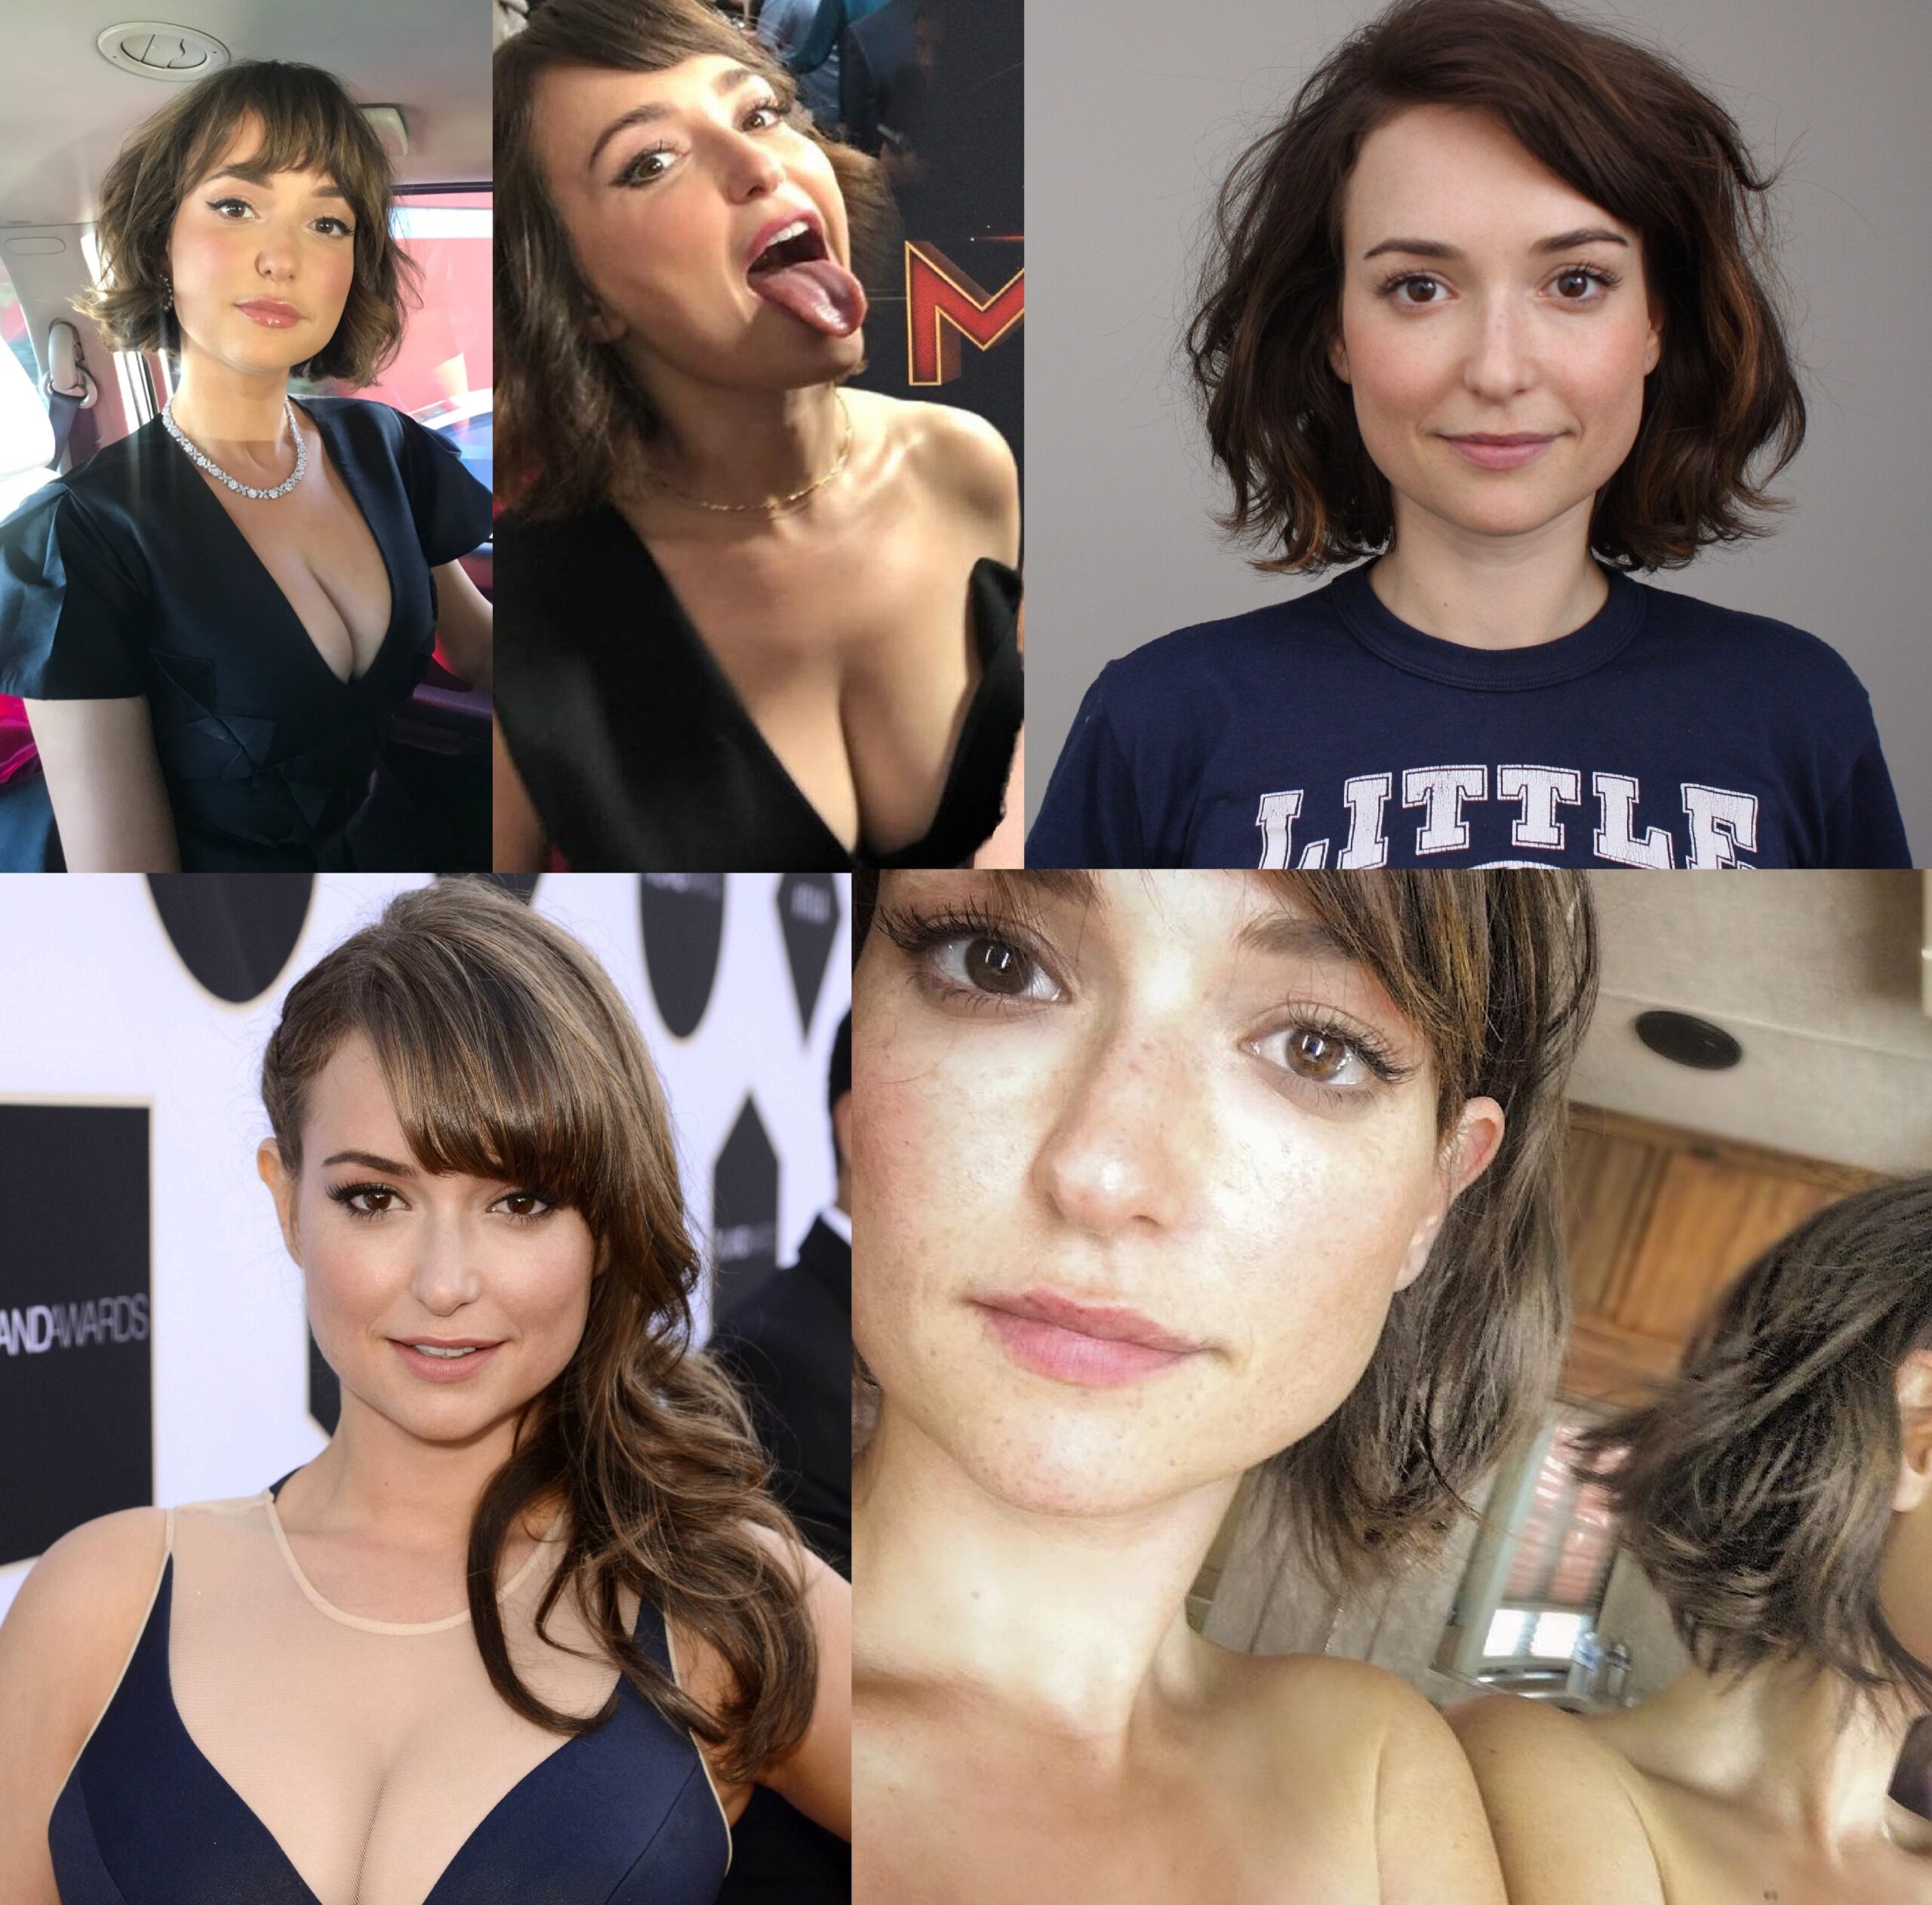 Milana Vayntrub is both a total cutie and incredibly hot